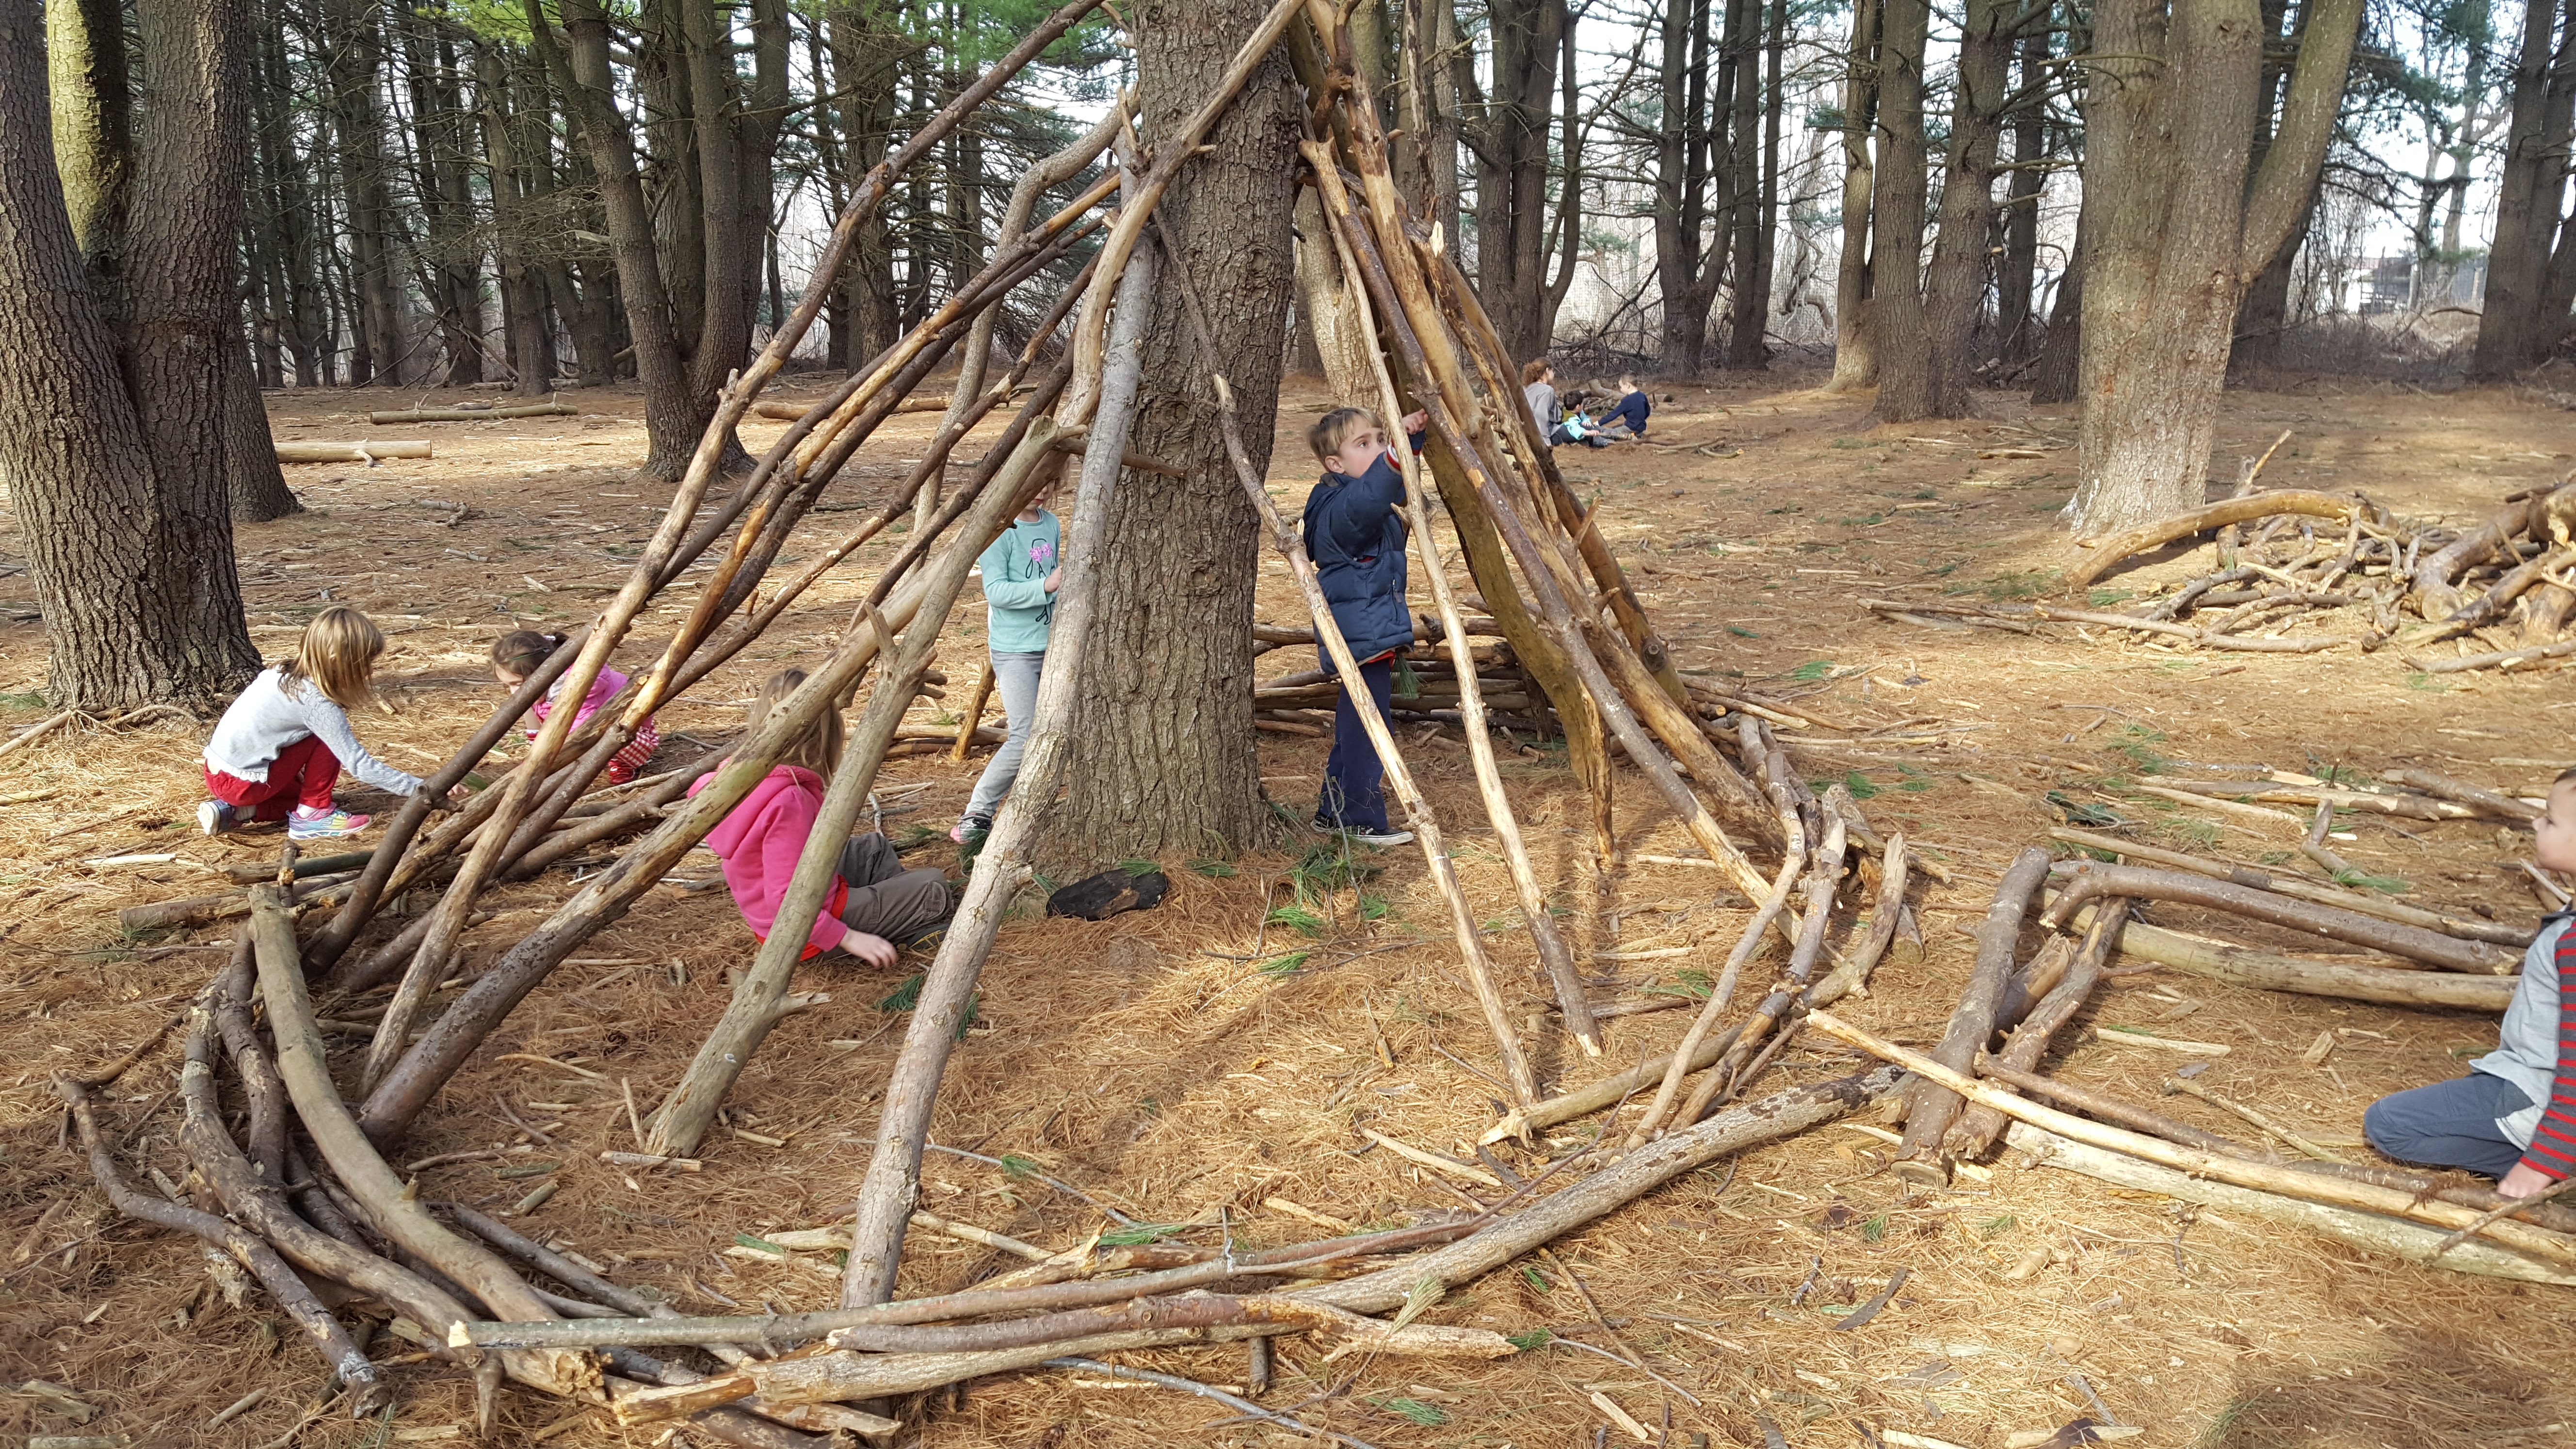 Children Need Nature: Fort building as a way to connect - Schuylkill Center  for Environmental Education